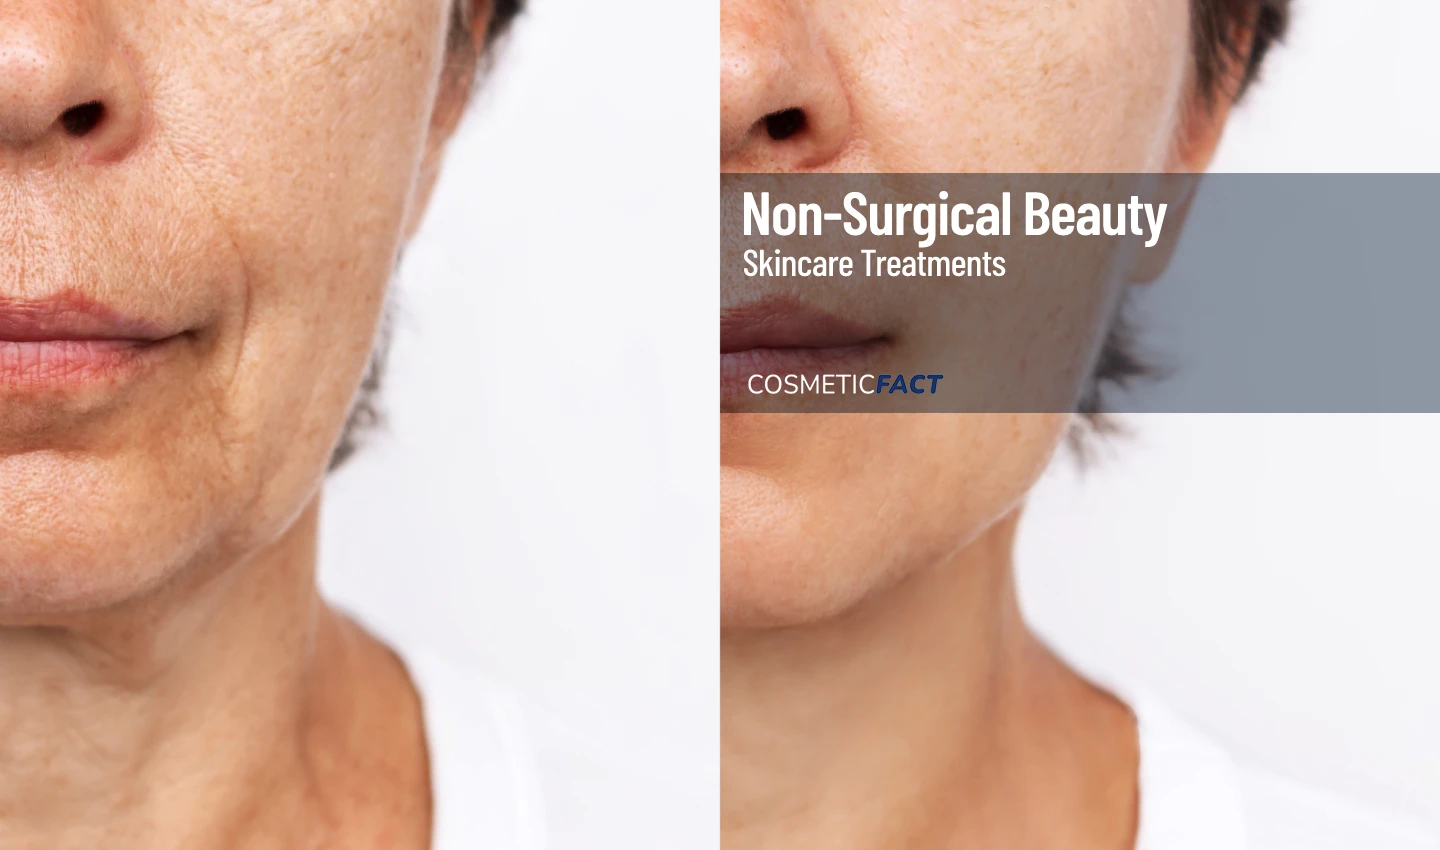 An image split in half, featuring two shots of the same woman. One shot shows sagging skin around the lips, chin, and cheeks, while the other shows a more youthful, firm appearance in those areas. The image emphasizes the effects of non-surgical solutions for sagging skin and the importance of achieving a more youthful appearance.